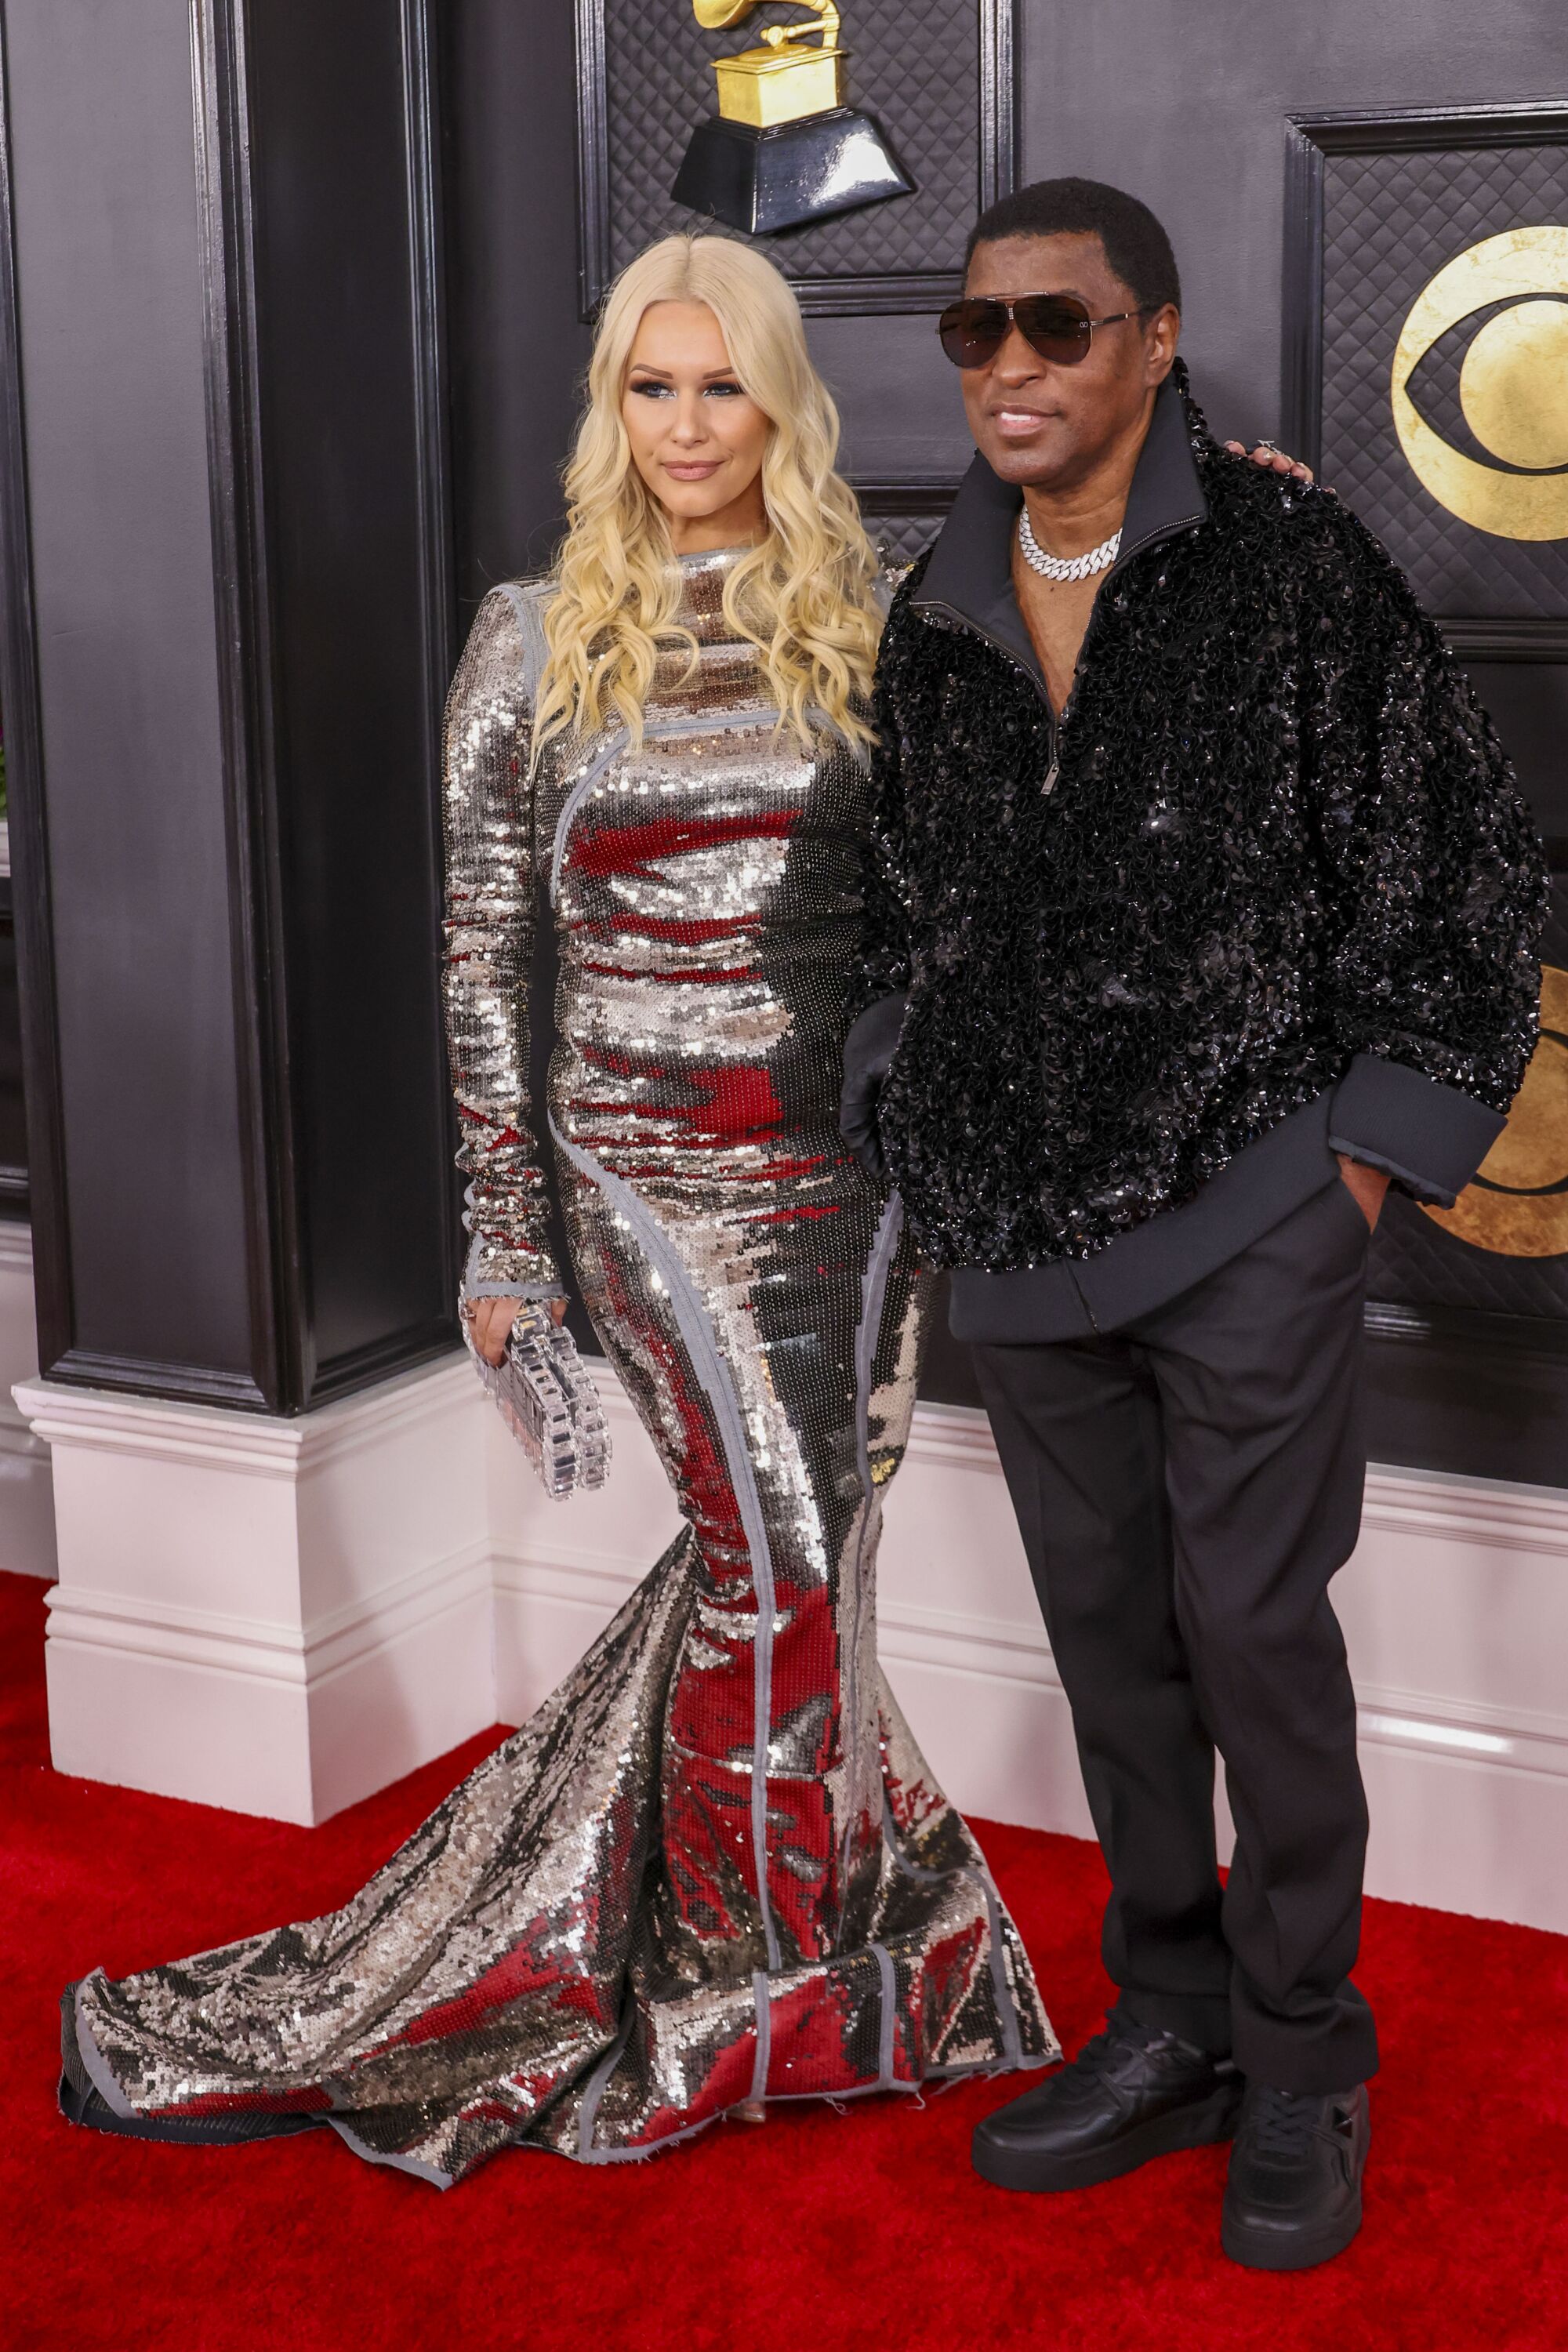 Babyface and Rika on the 2023 Grammy Awards red carpet.